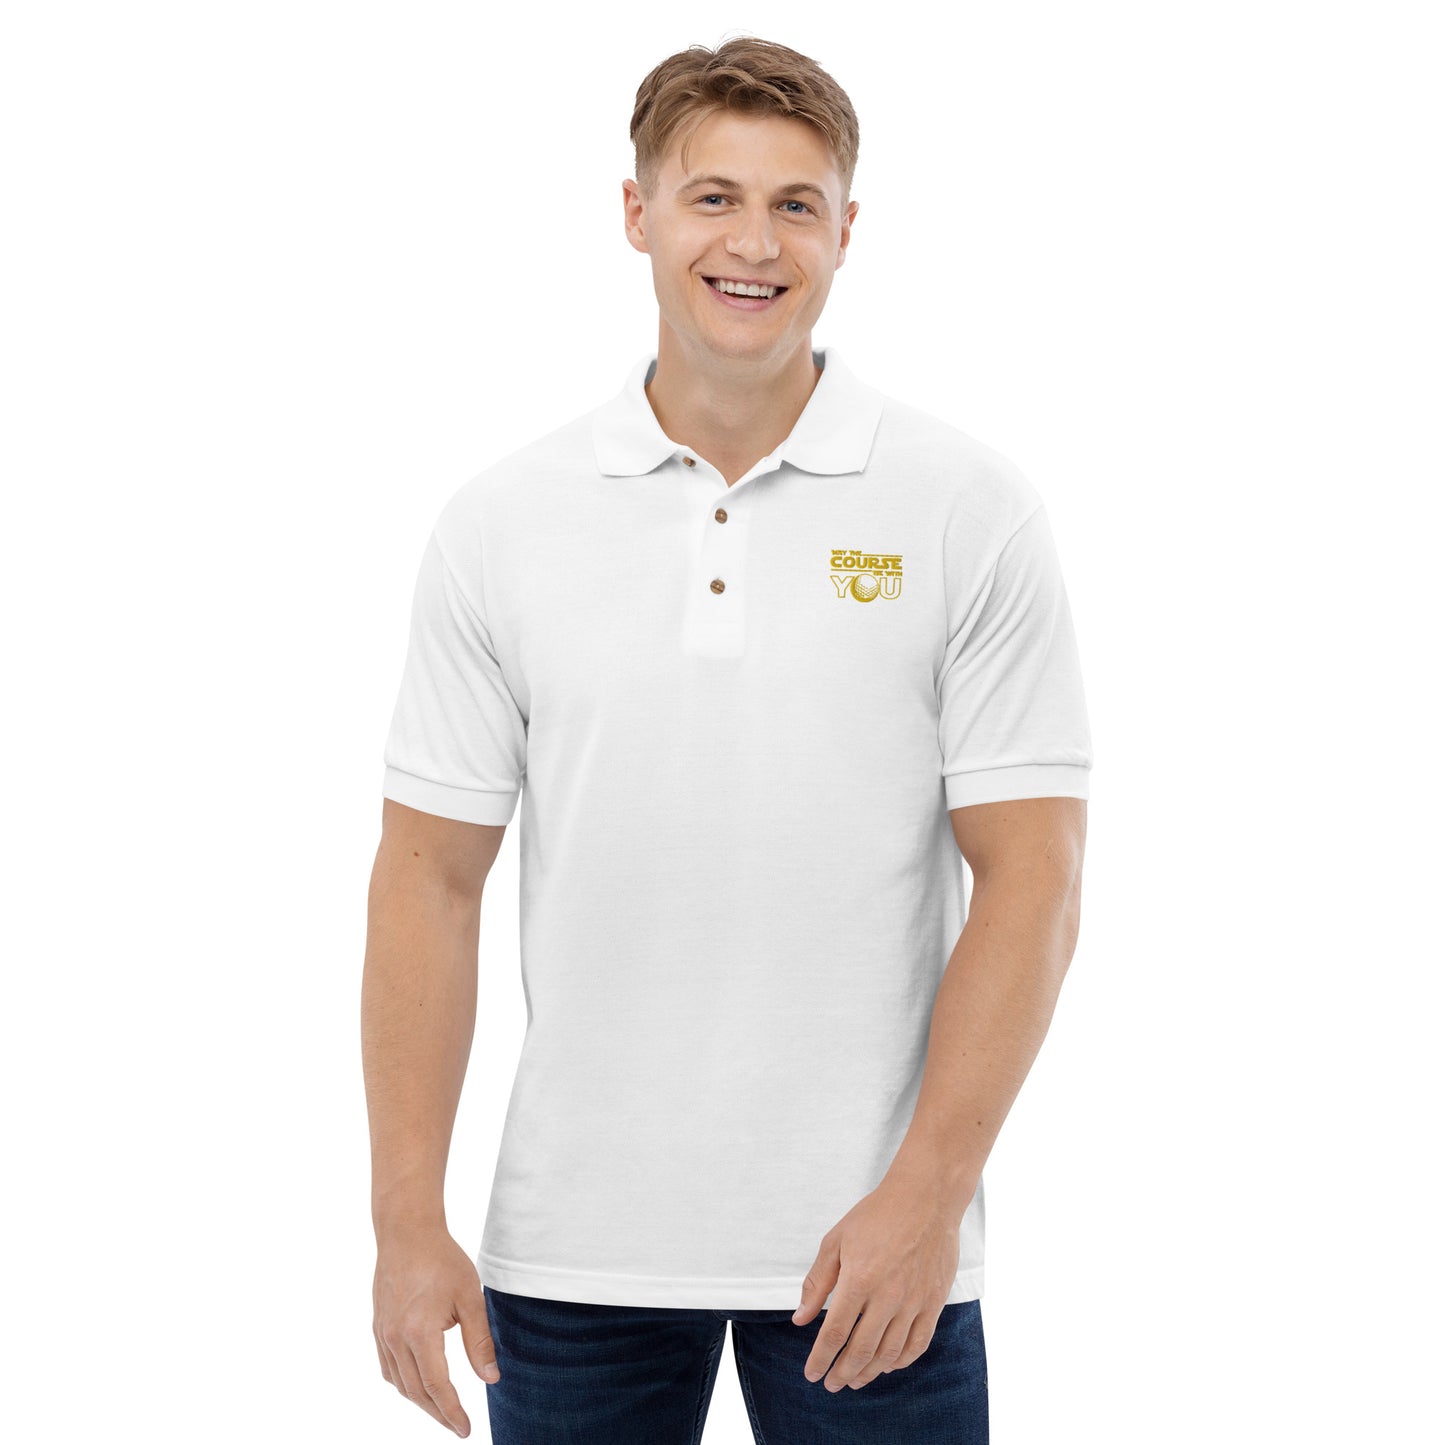 May The Course Be With You Polo Shirt (Yellow Lettering)